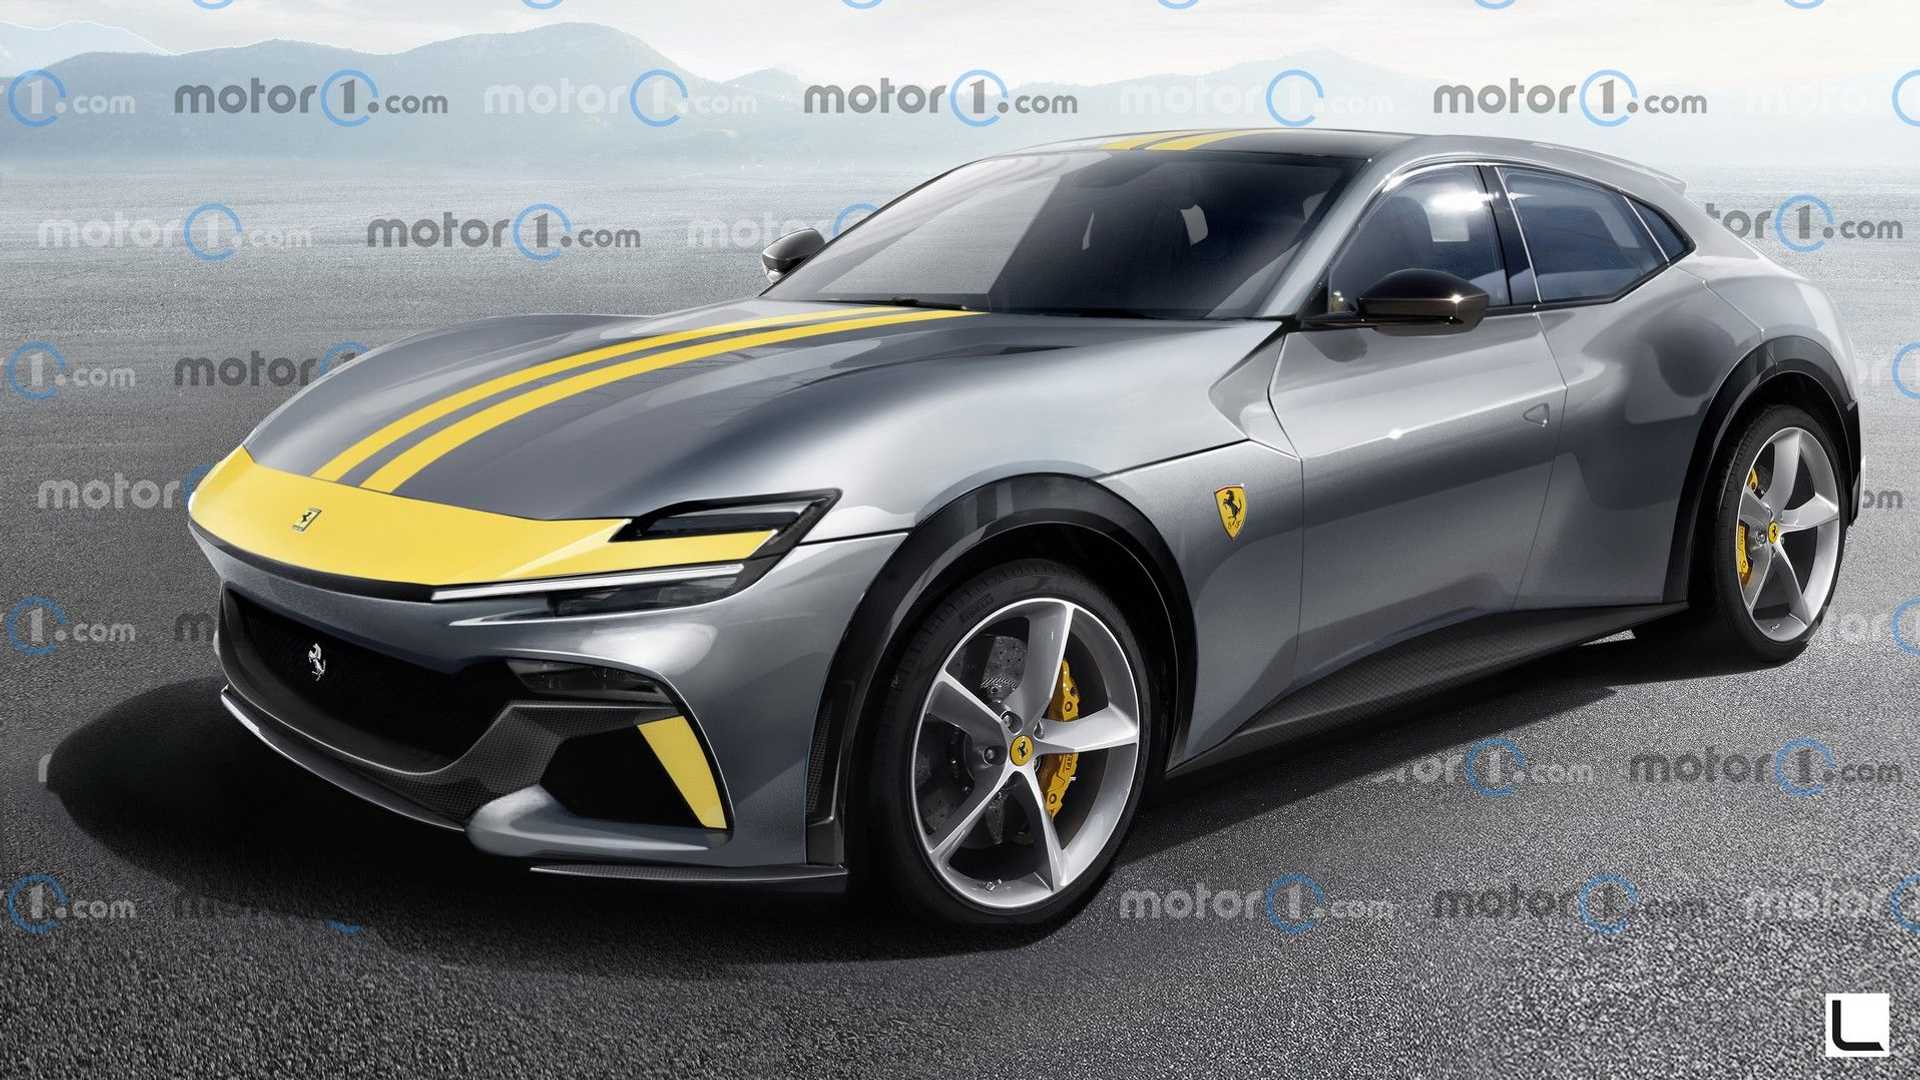 Ferrari Purosangue Suv Accurately Rendered After Leaked Photos